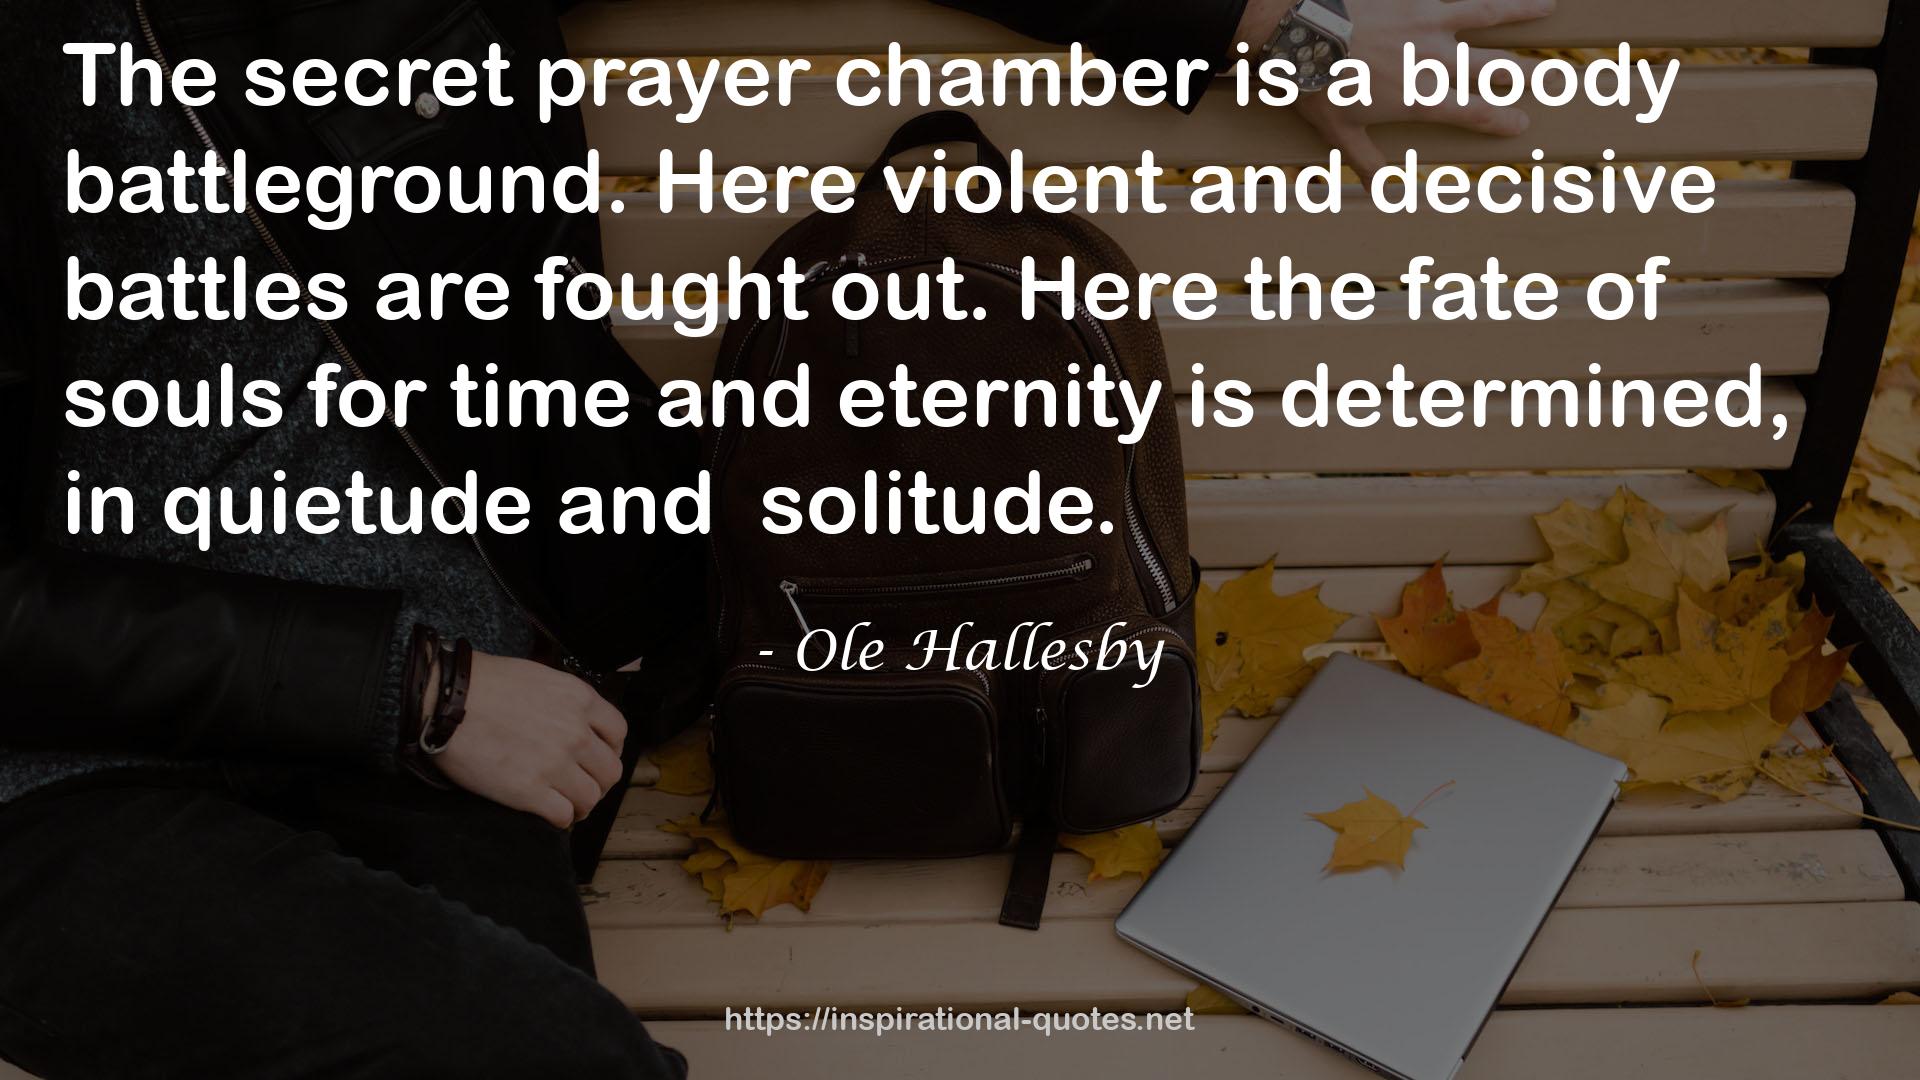 Ole Hallesby QUOTES